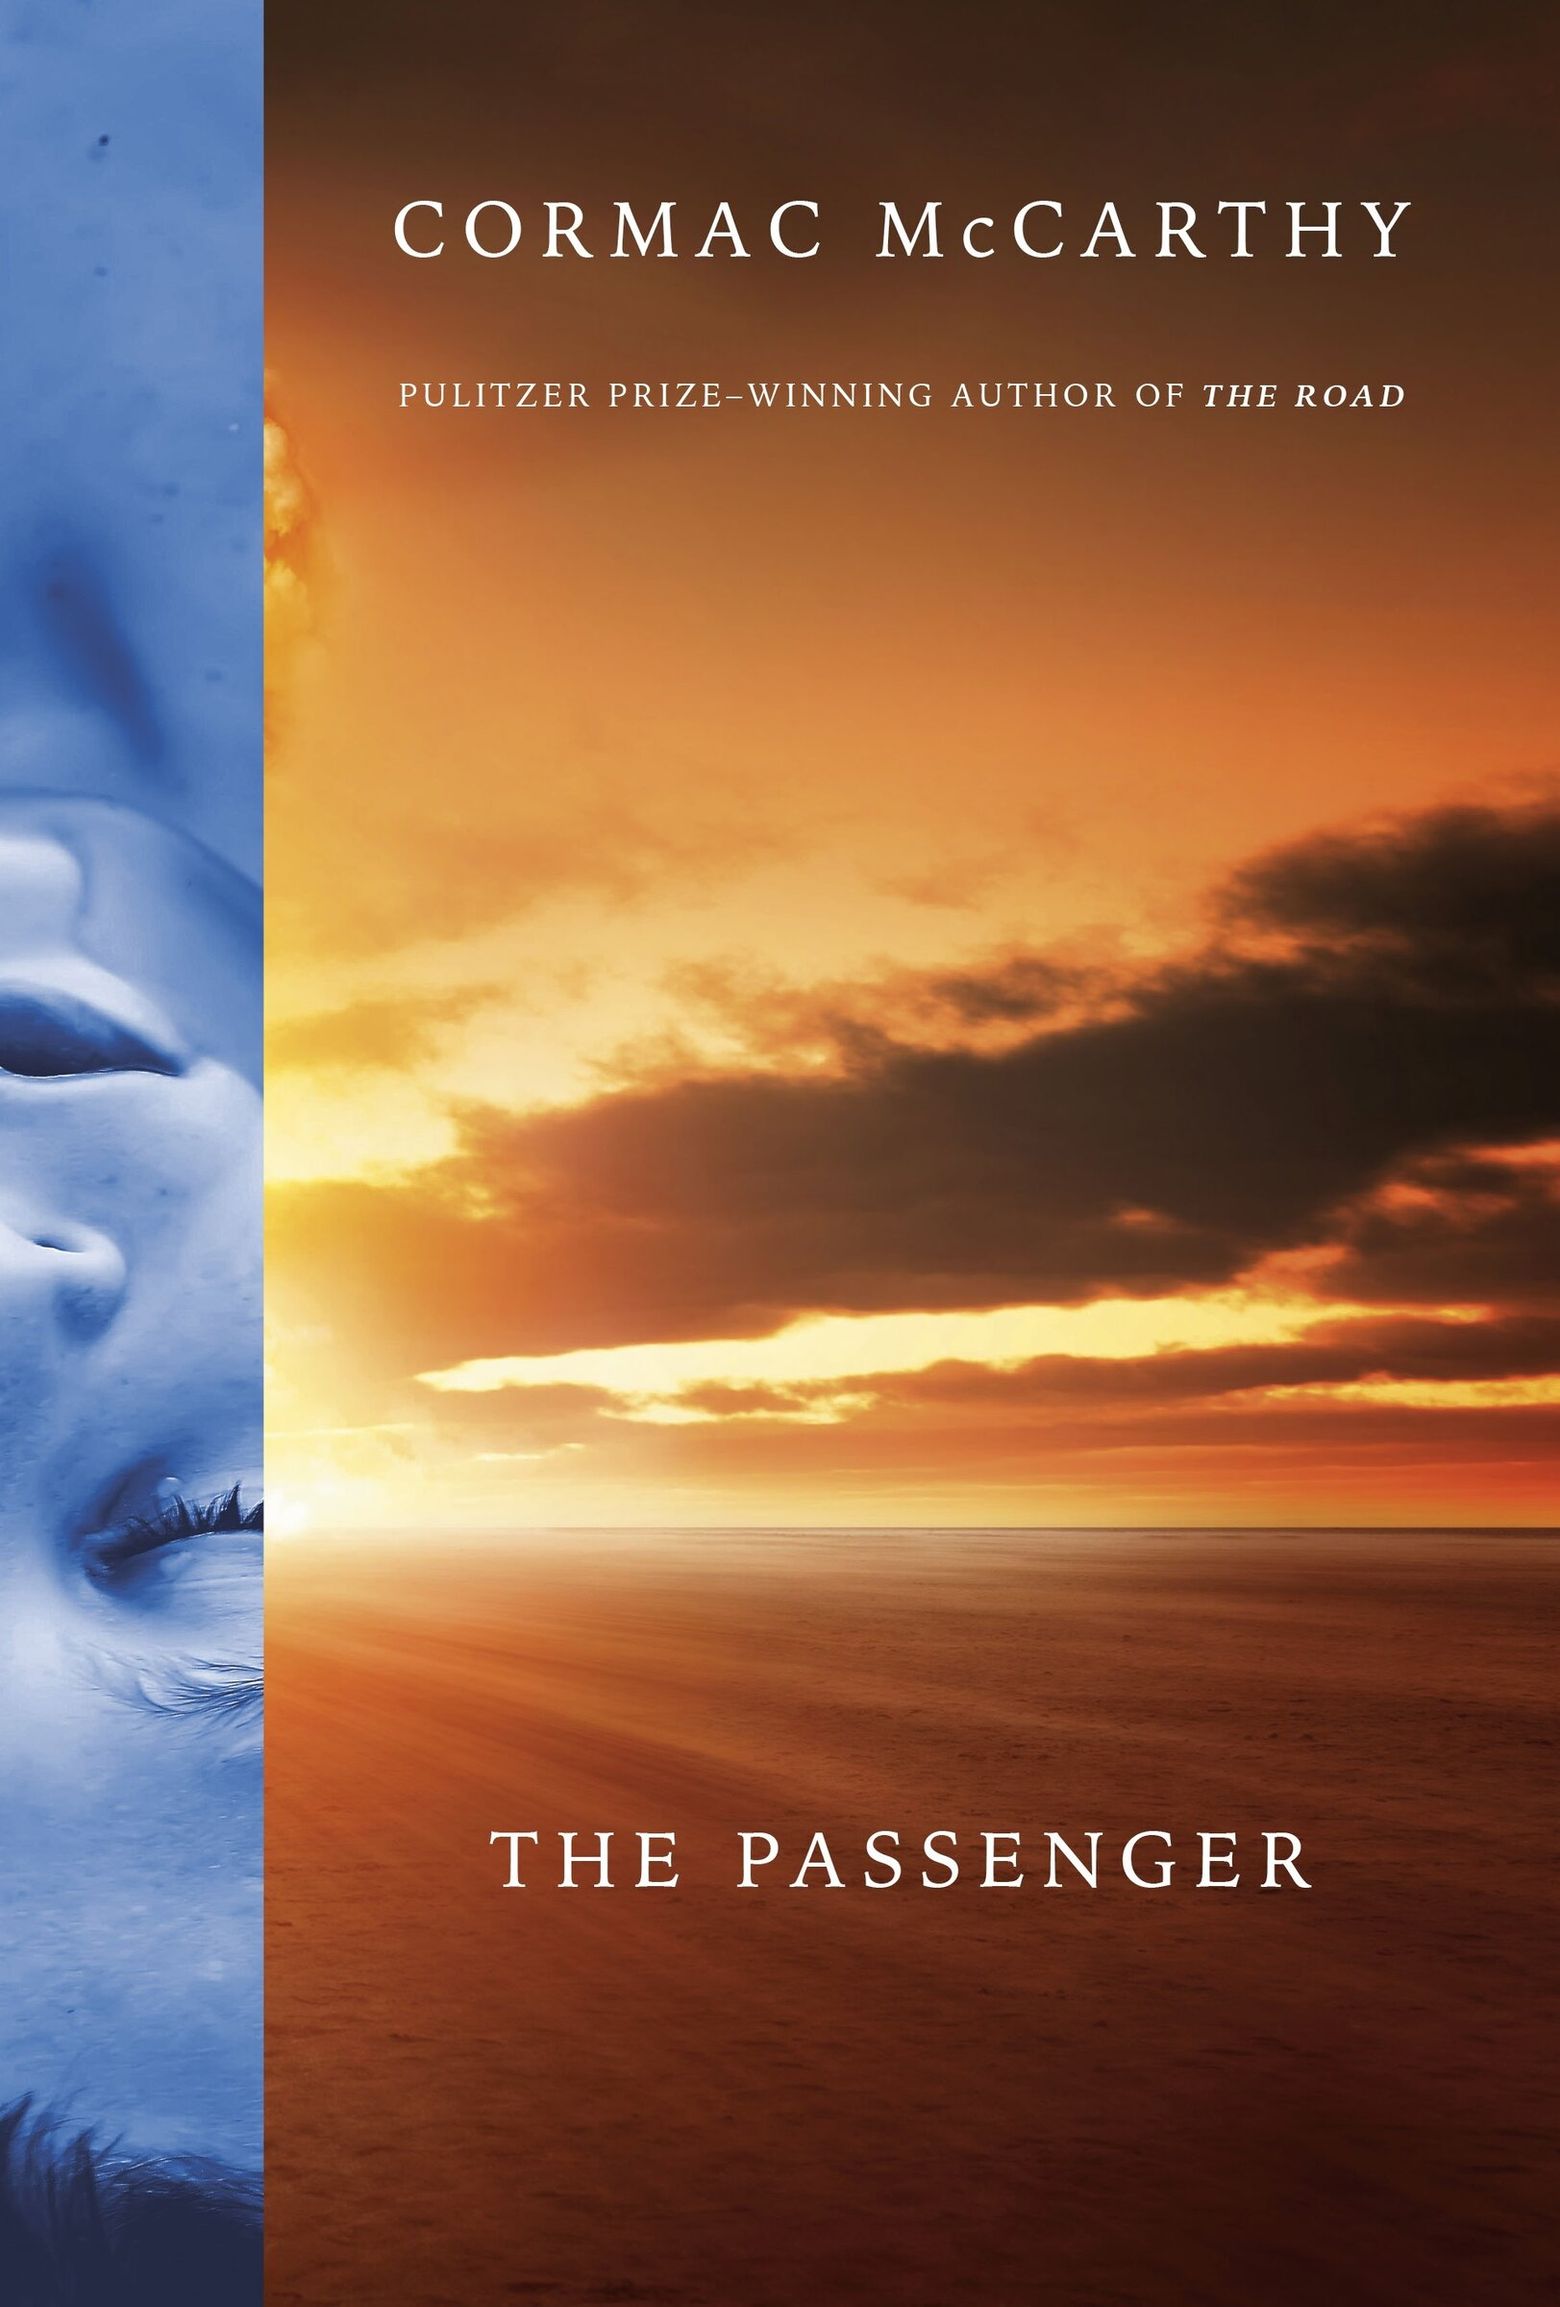 Cormac McCarthy returns with cryptic 'The Passenger